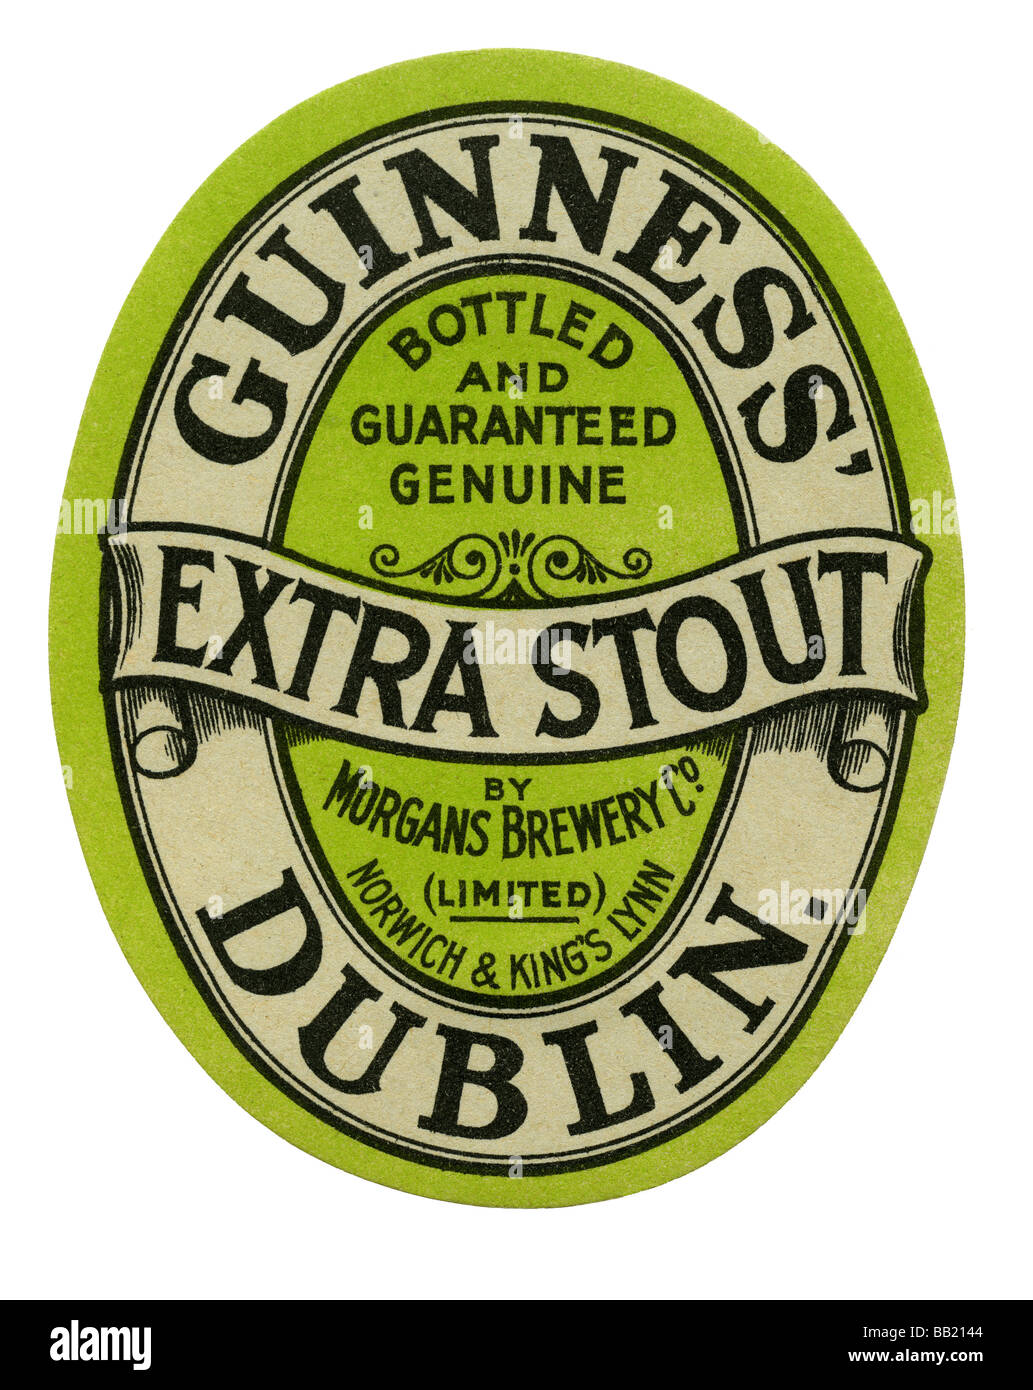 Old Guinness label for Extra Stout, bottled by Morgans Brewery, King's Lynn and Norwich, Norfolk Stock Photo